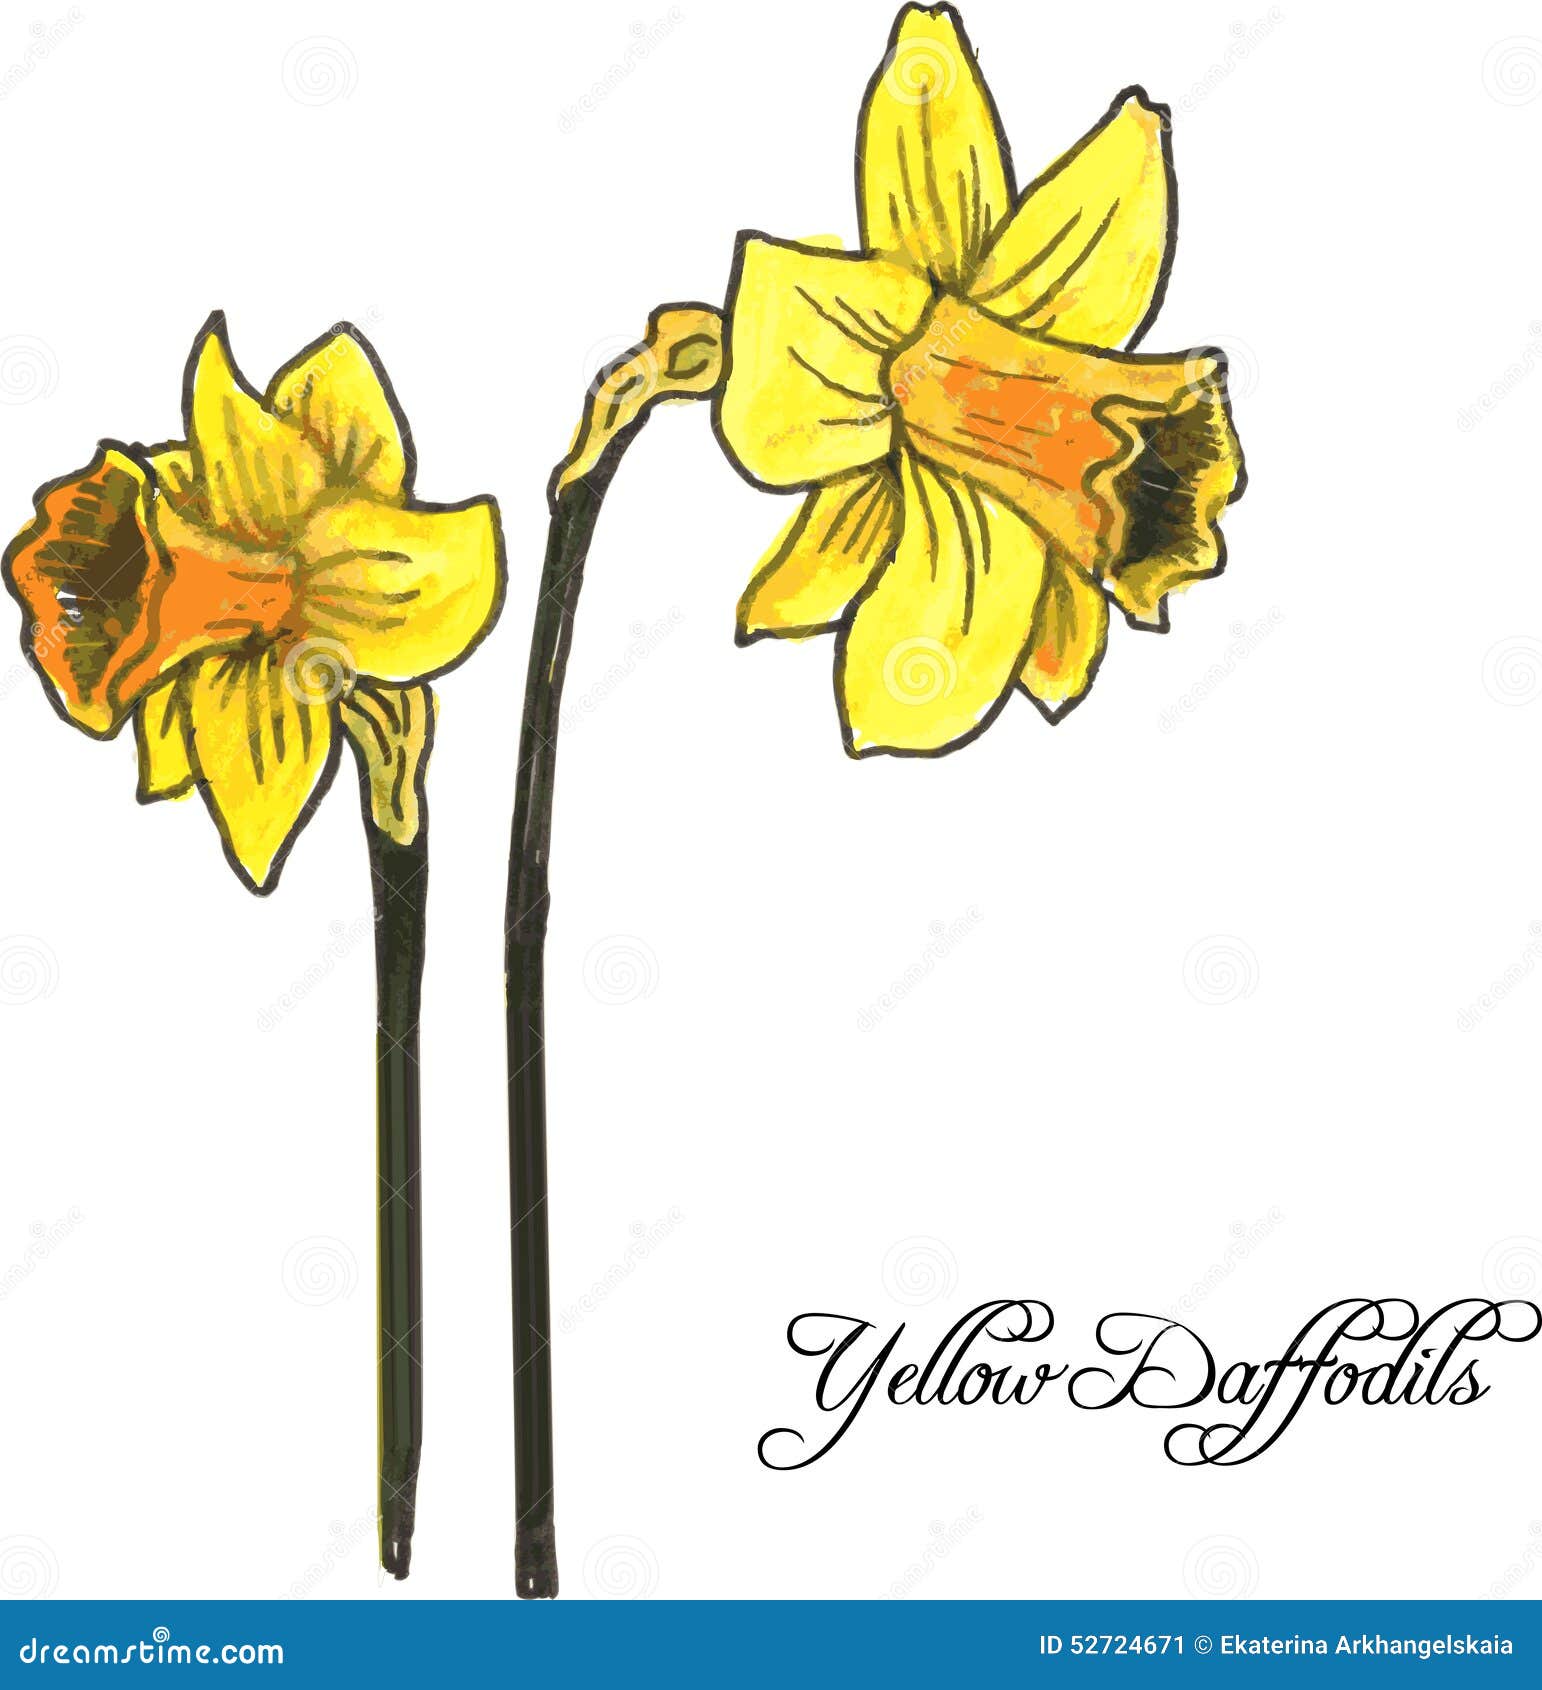 Two yellow daffodils stock vector. Illustration of nature - 52724671